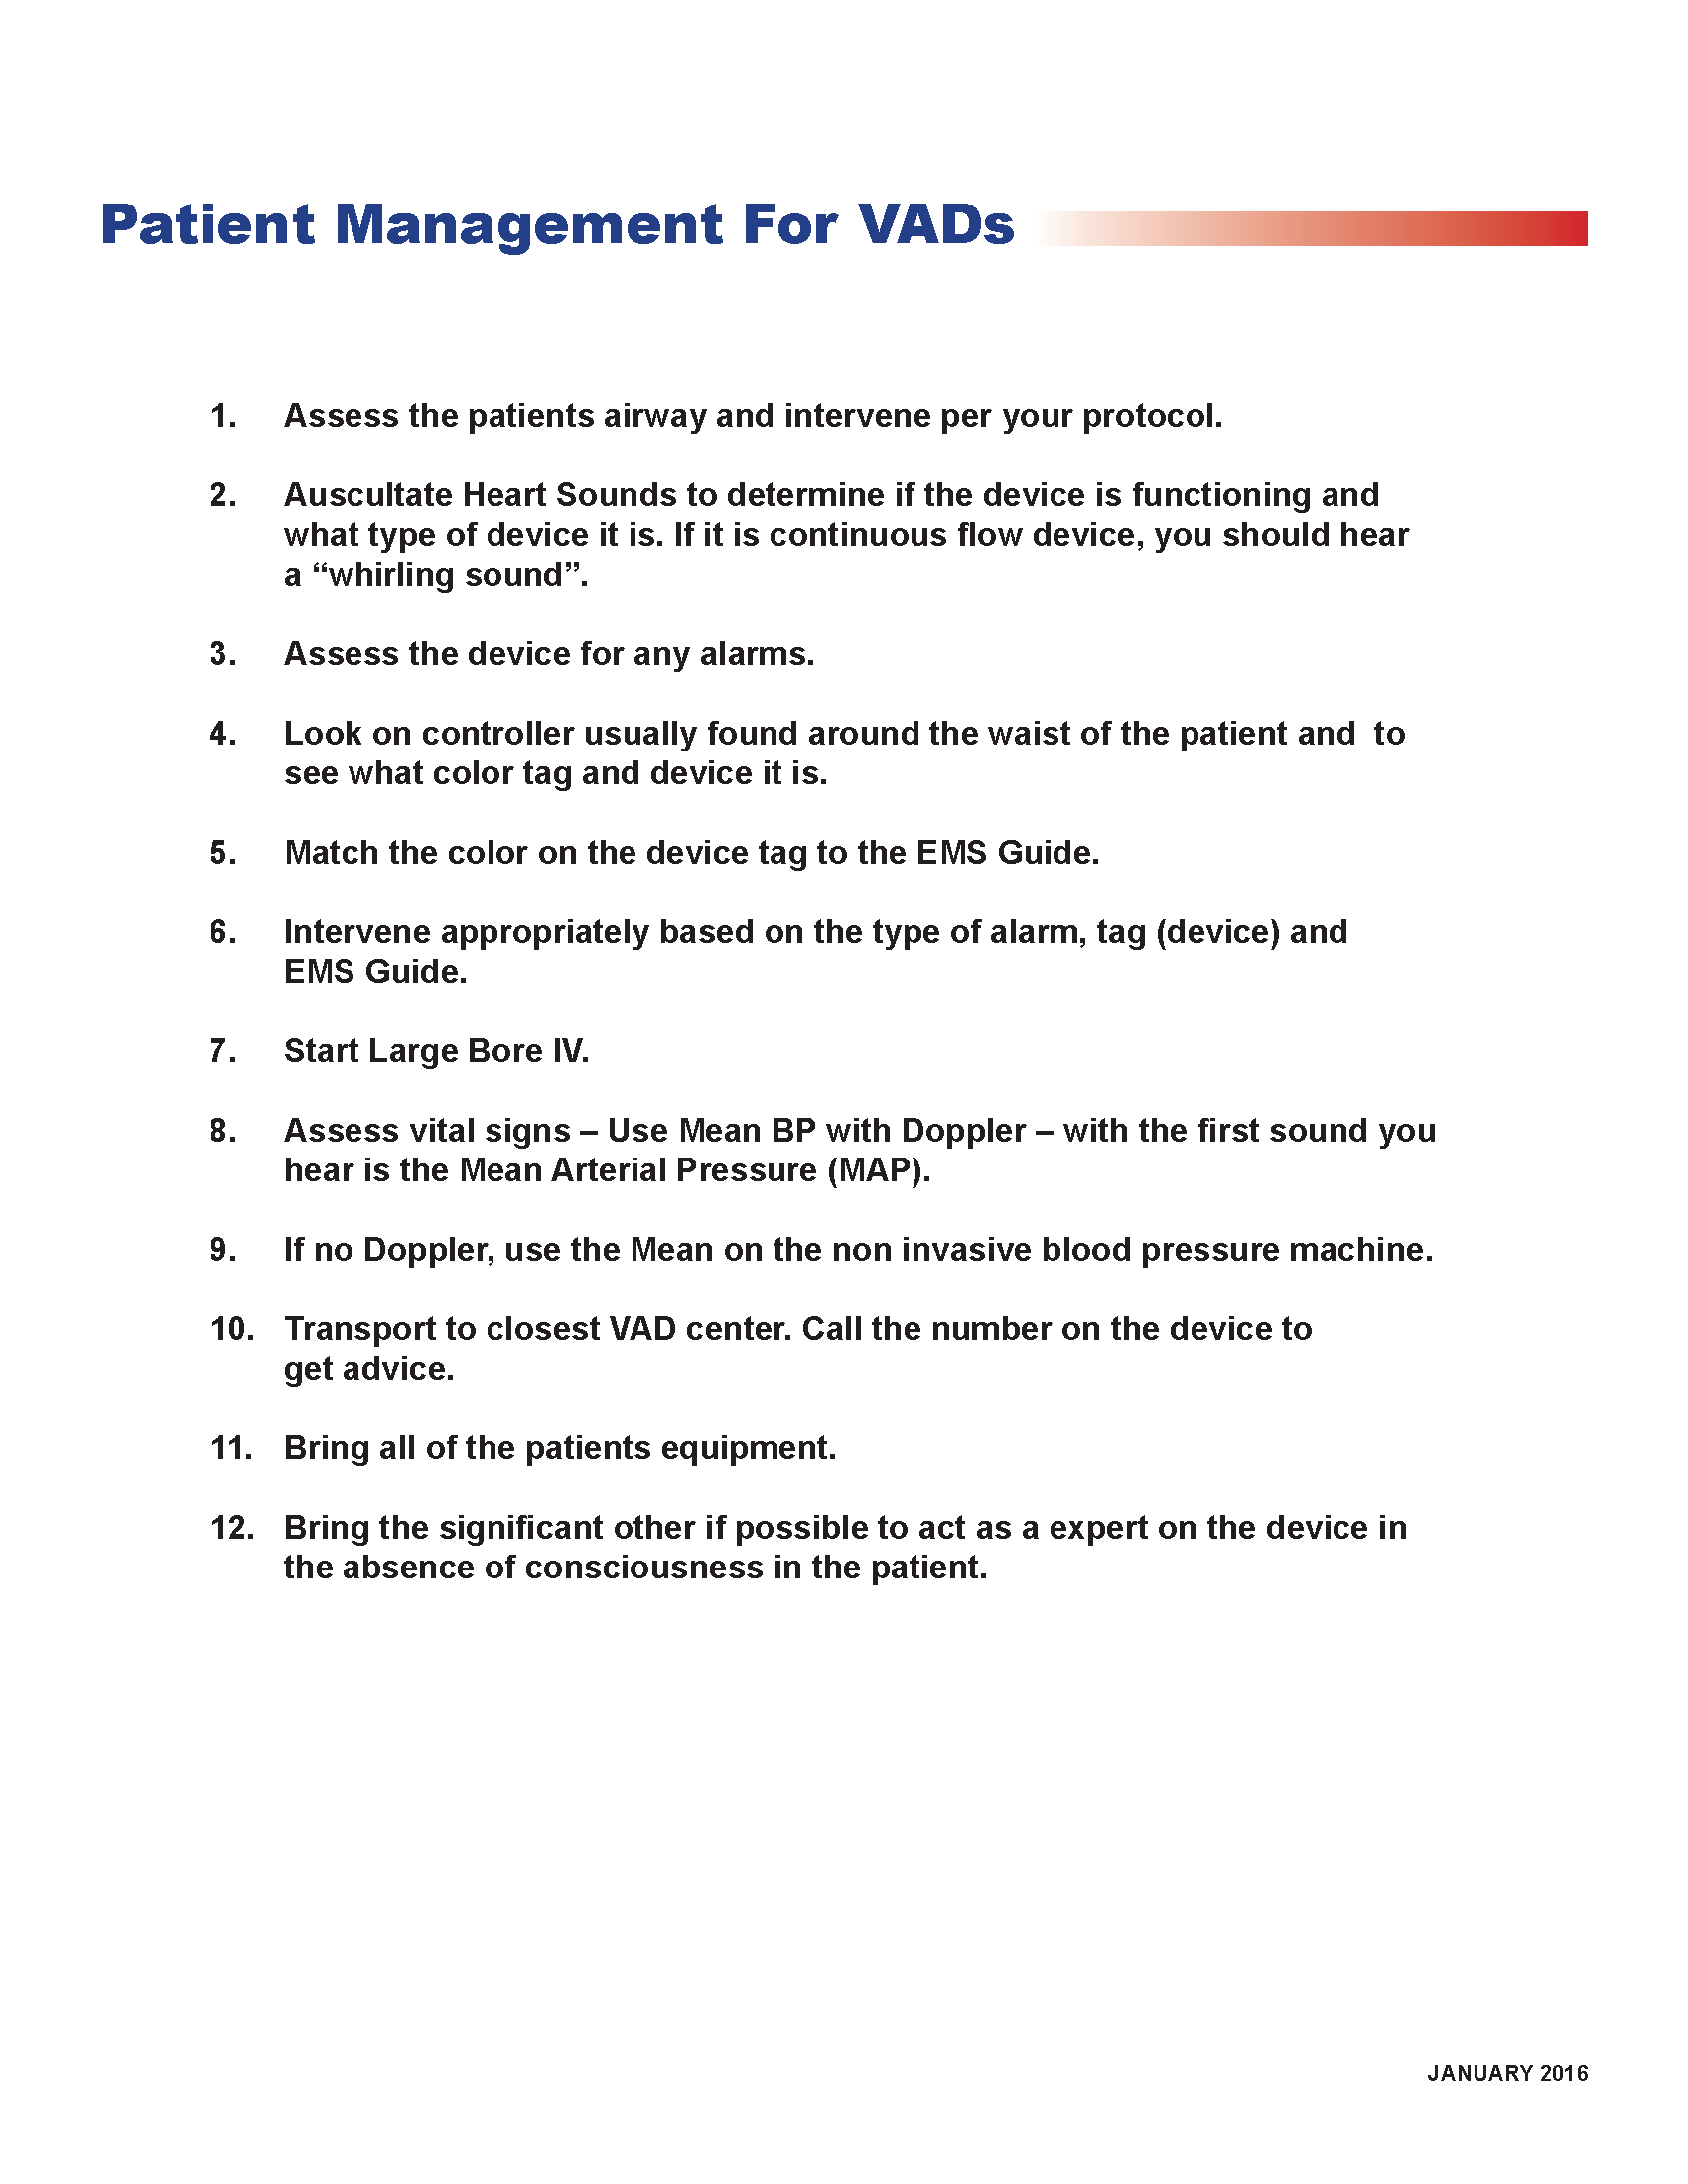 Ems Guidelines Duraheart_Page_2.png